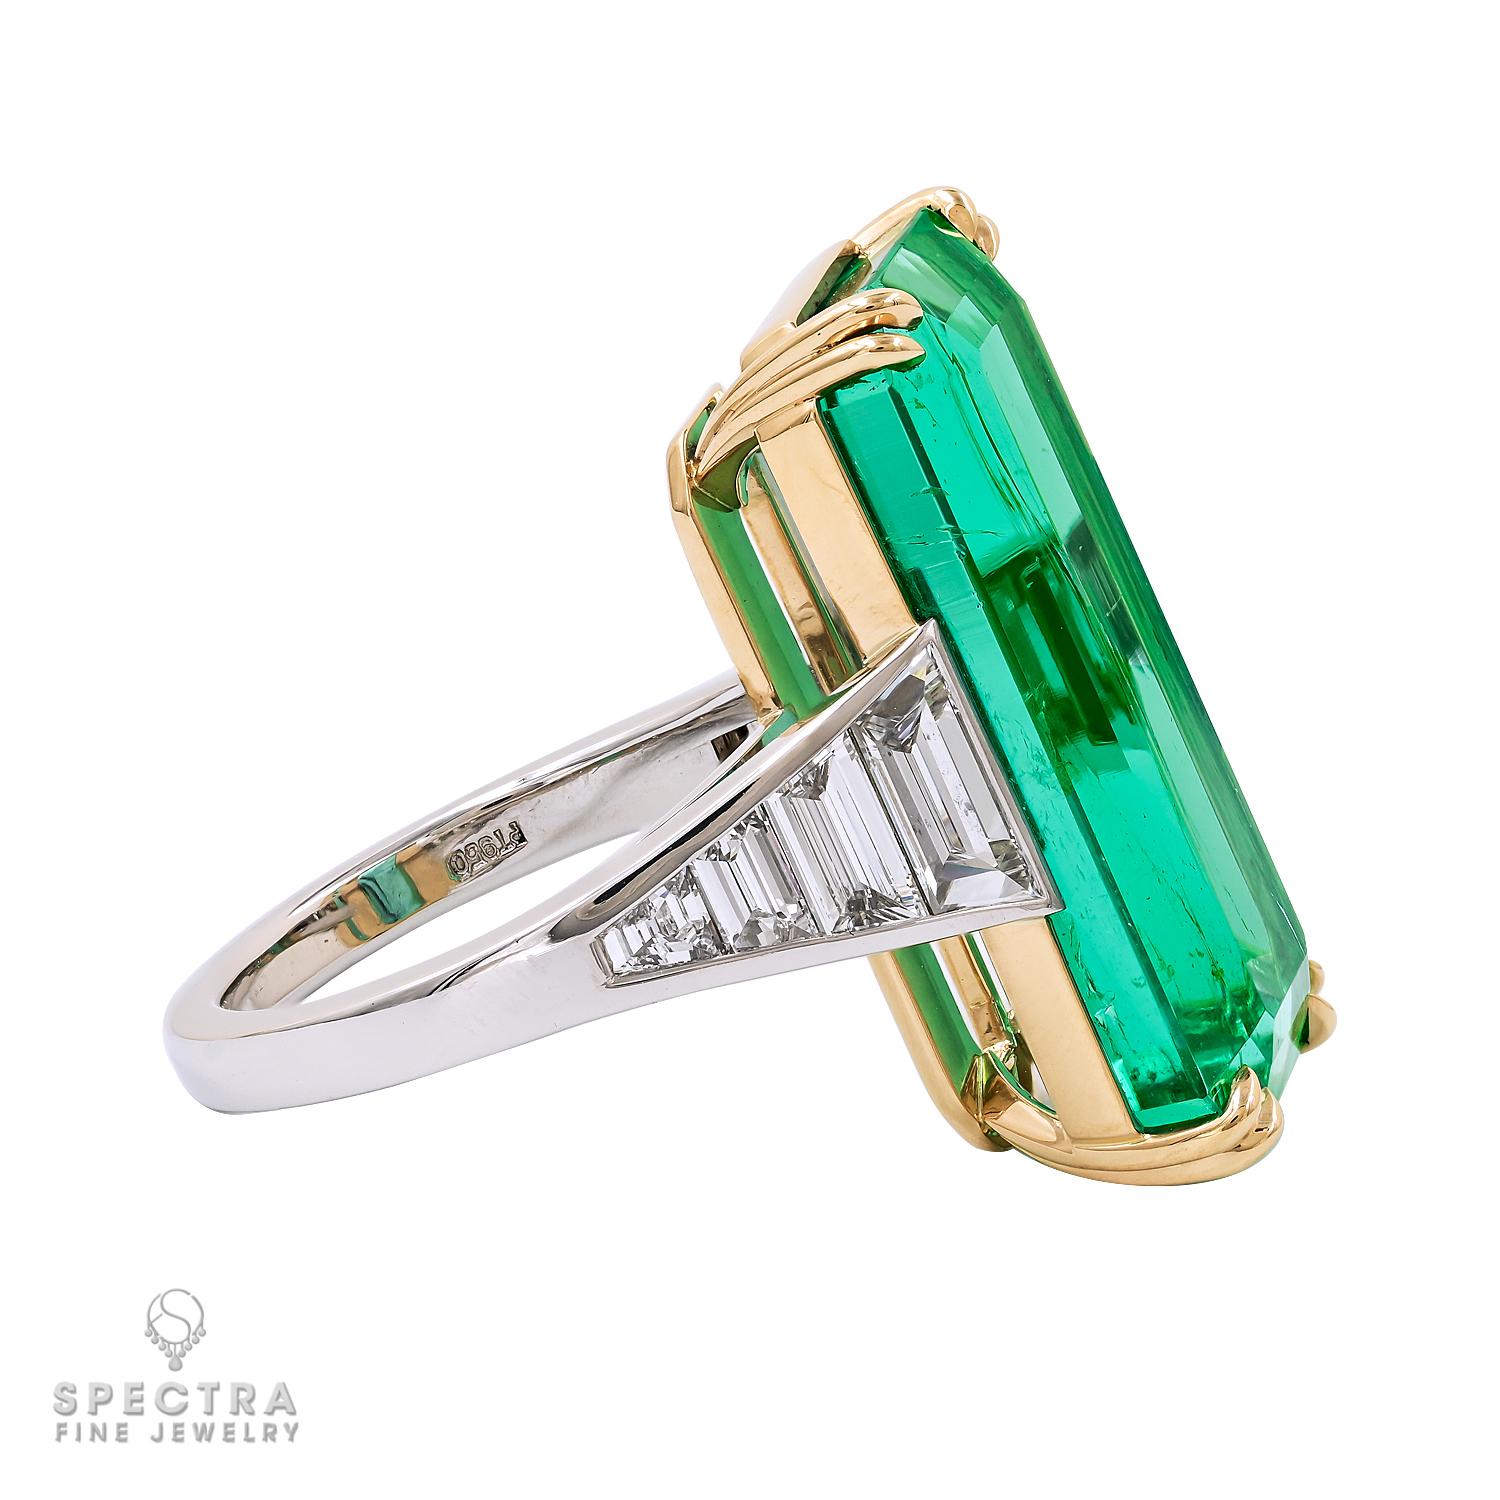 Contemporary Spectra Fine Jewelry, Certified 15.91 Carat Colombian Emerald Ring For Sale